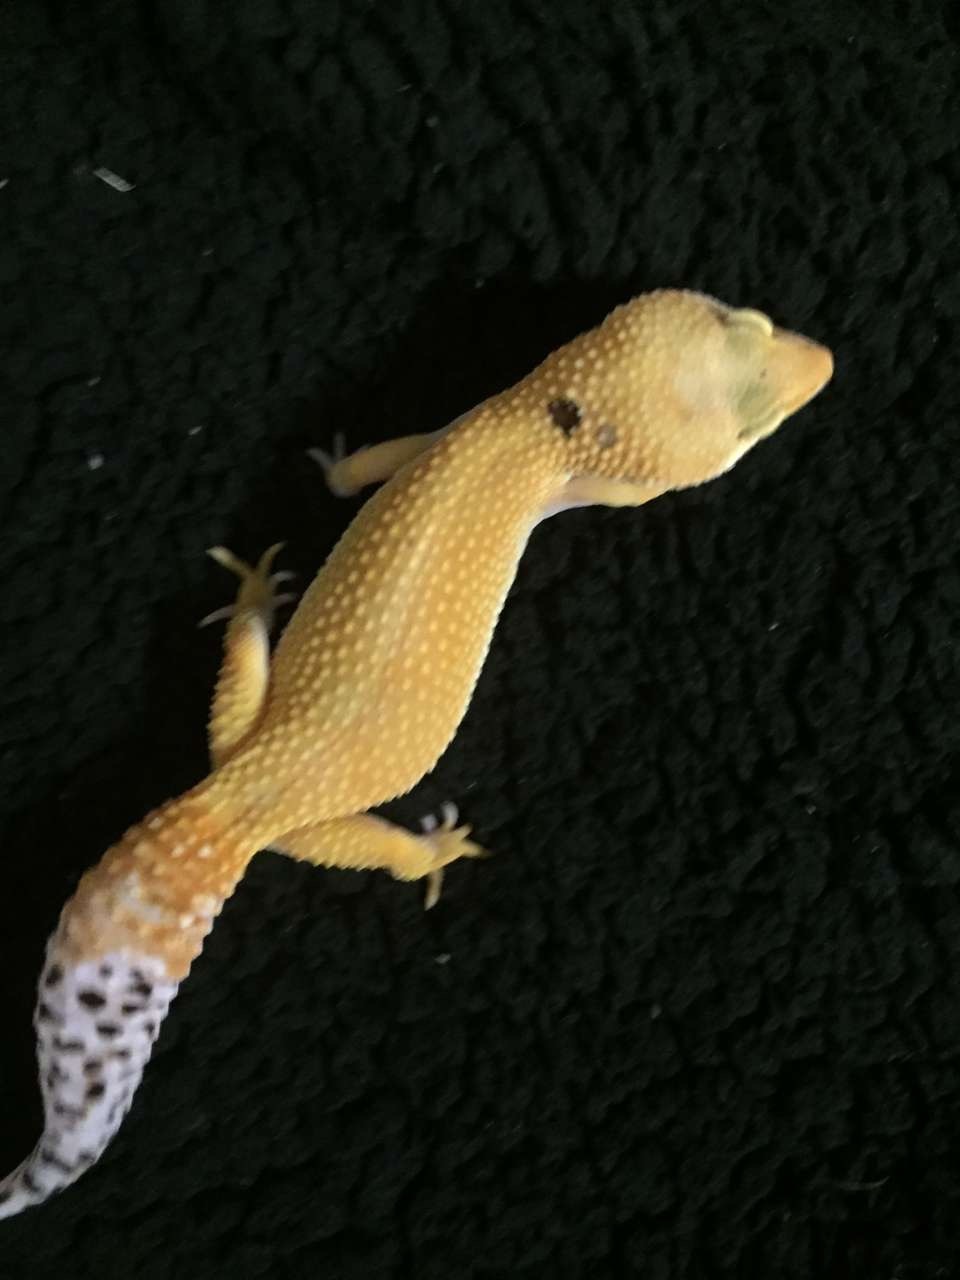 Super Hypo Tangerine Carrot Tail Baldy Paradox Leopard Gecko by A Marigold Gecko